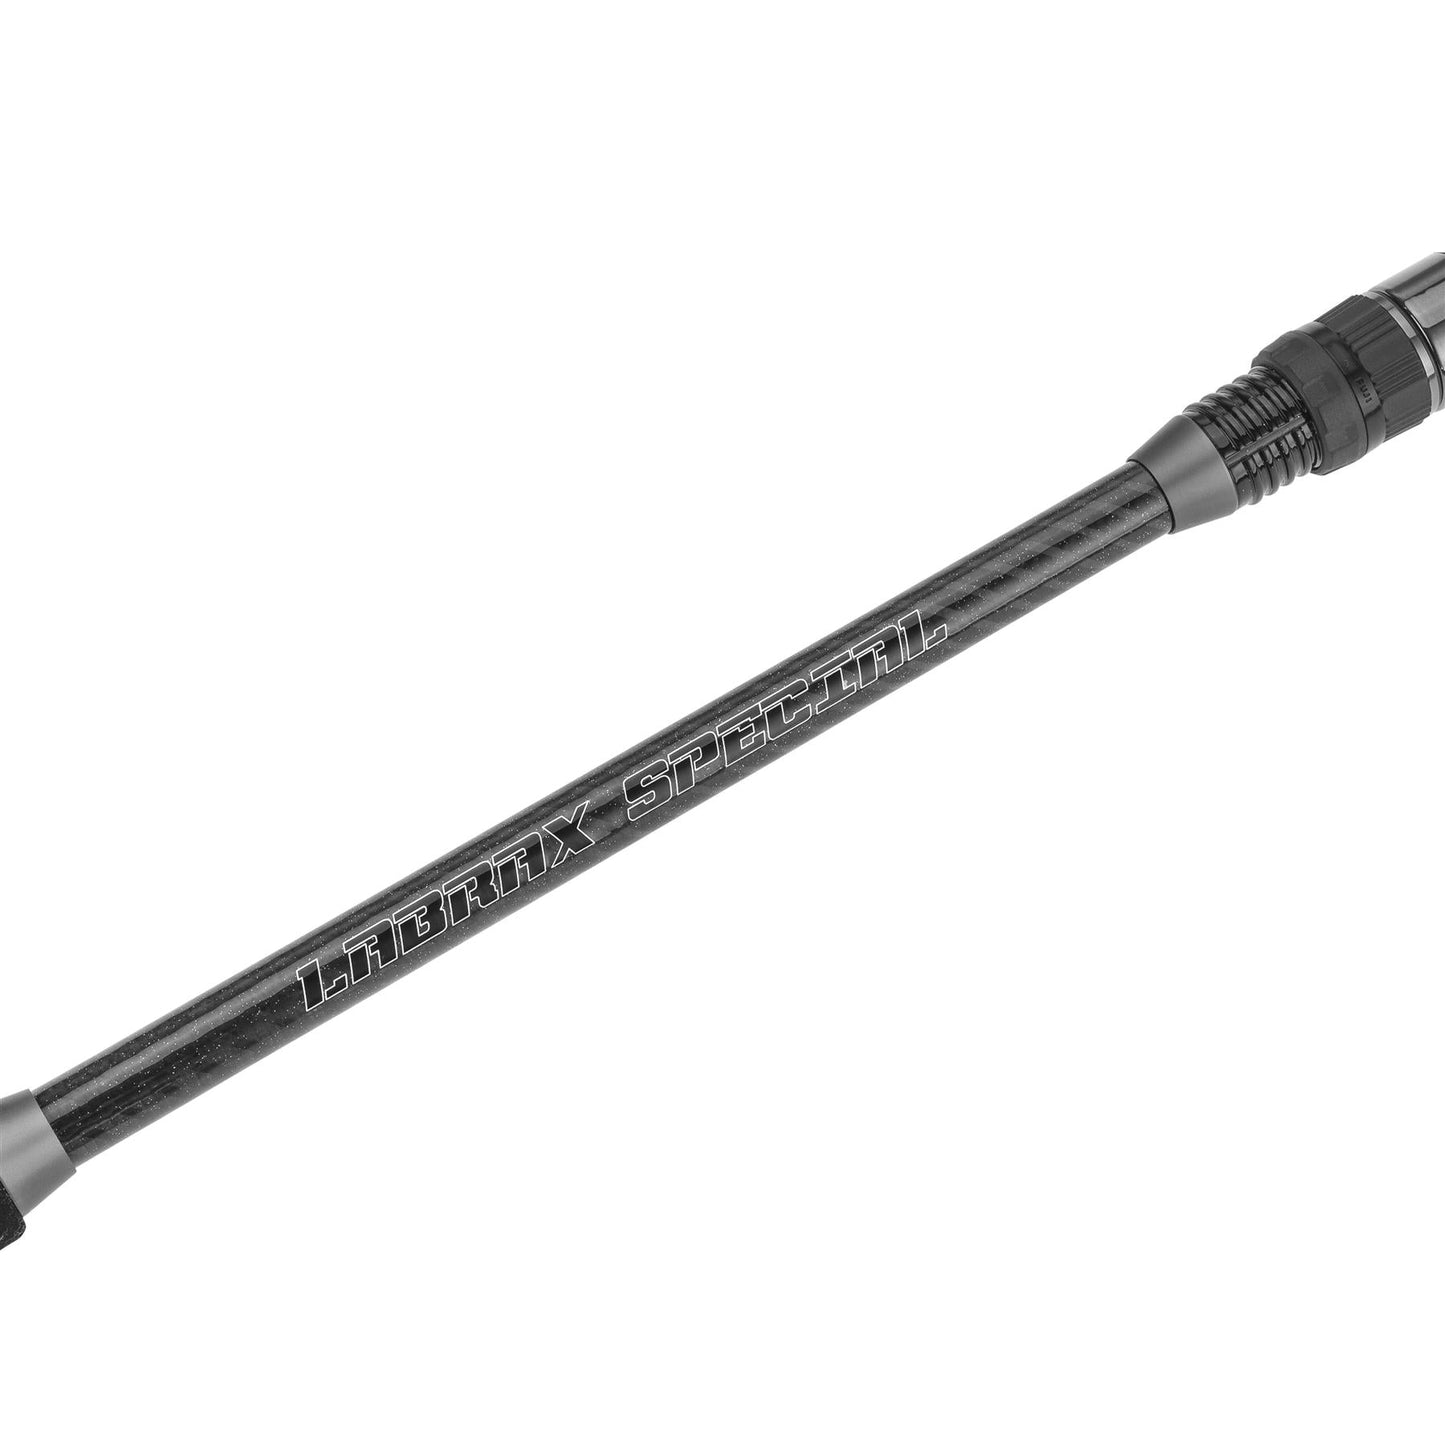 HTO N70 Labrax Special Travel Rod 9ft 4in 7-42g 4pc